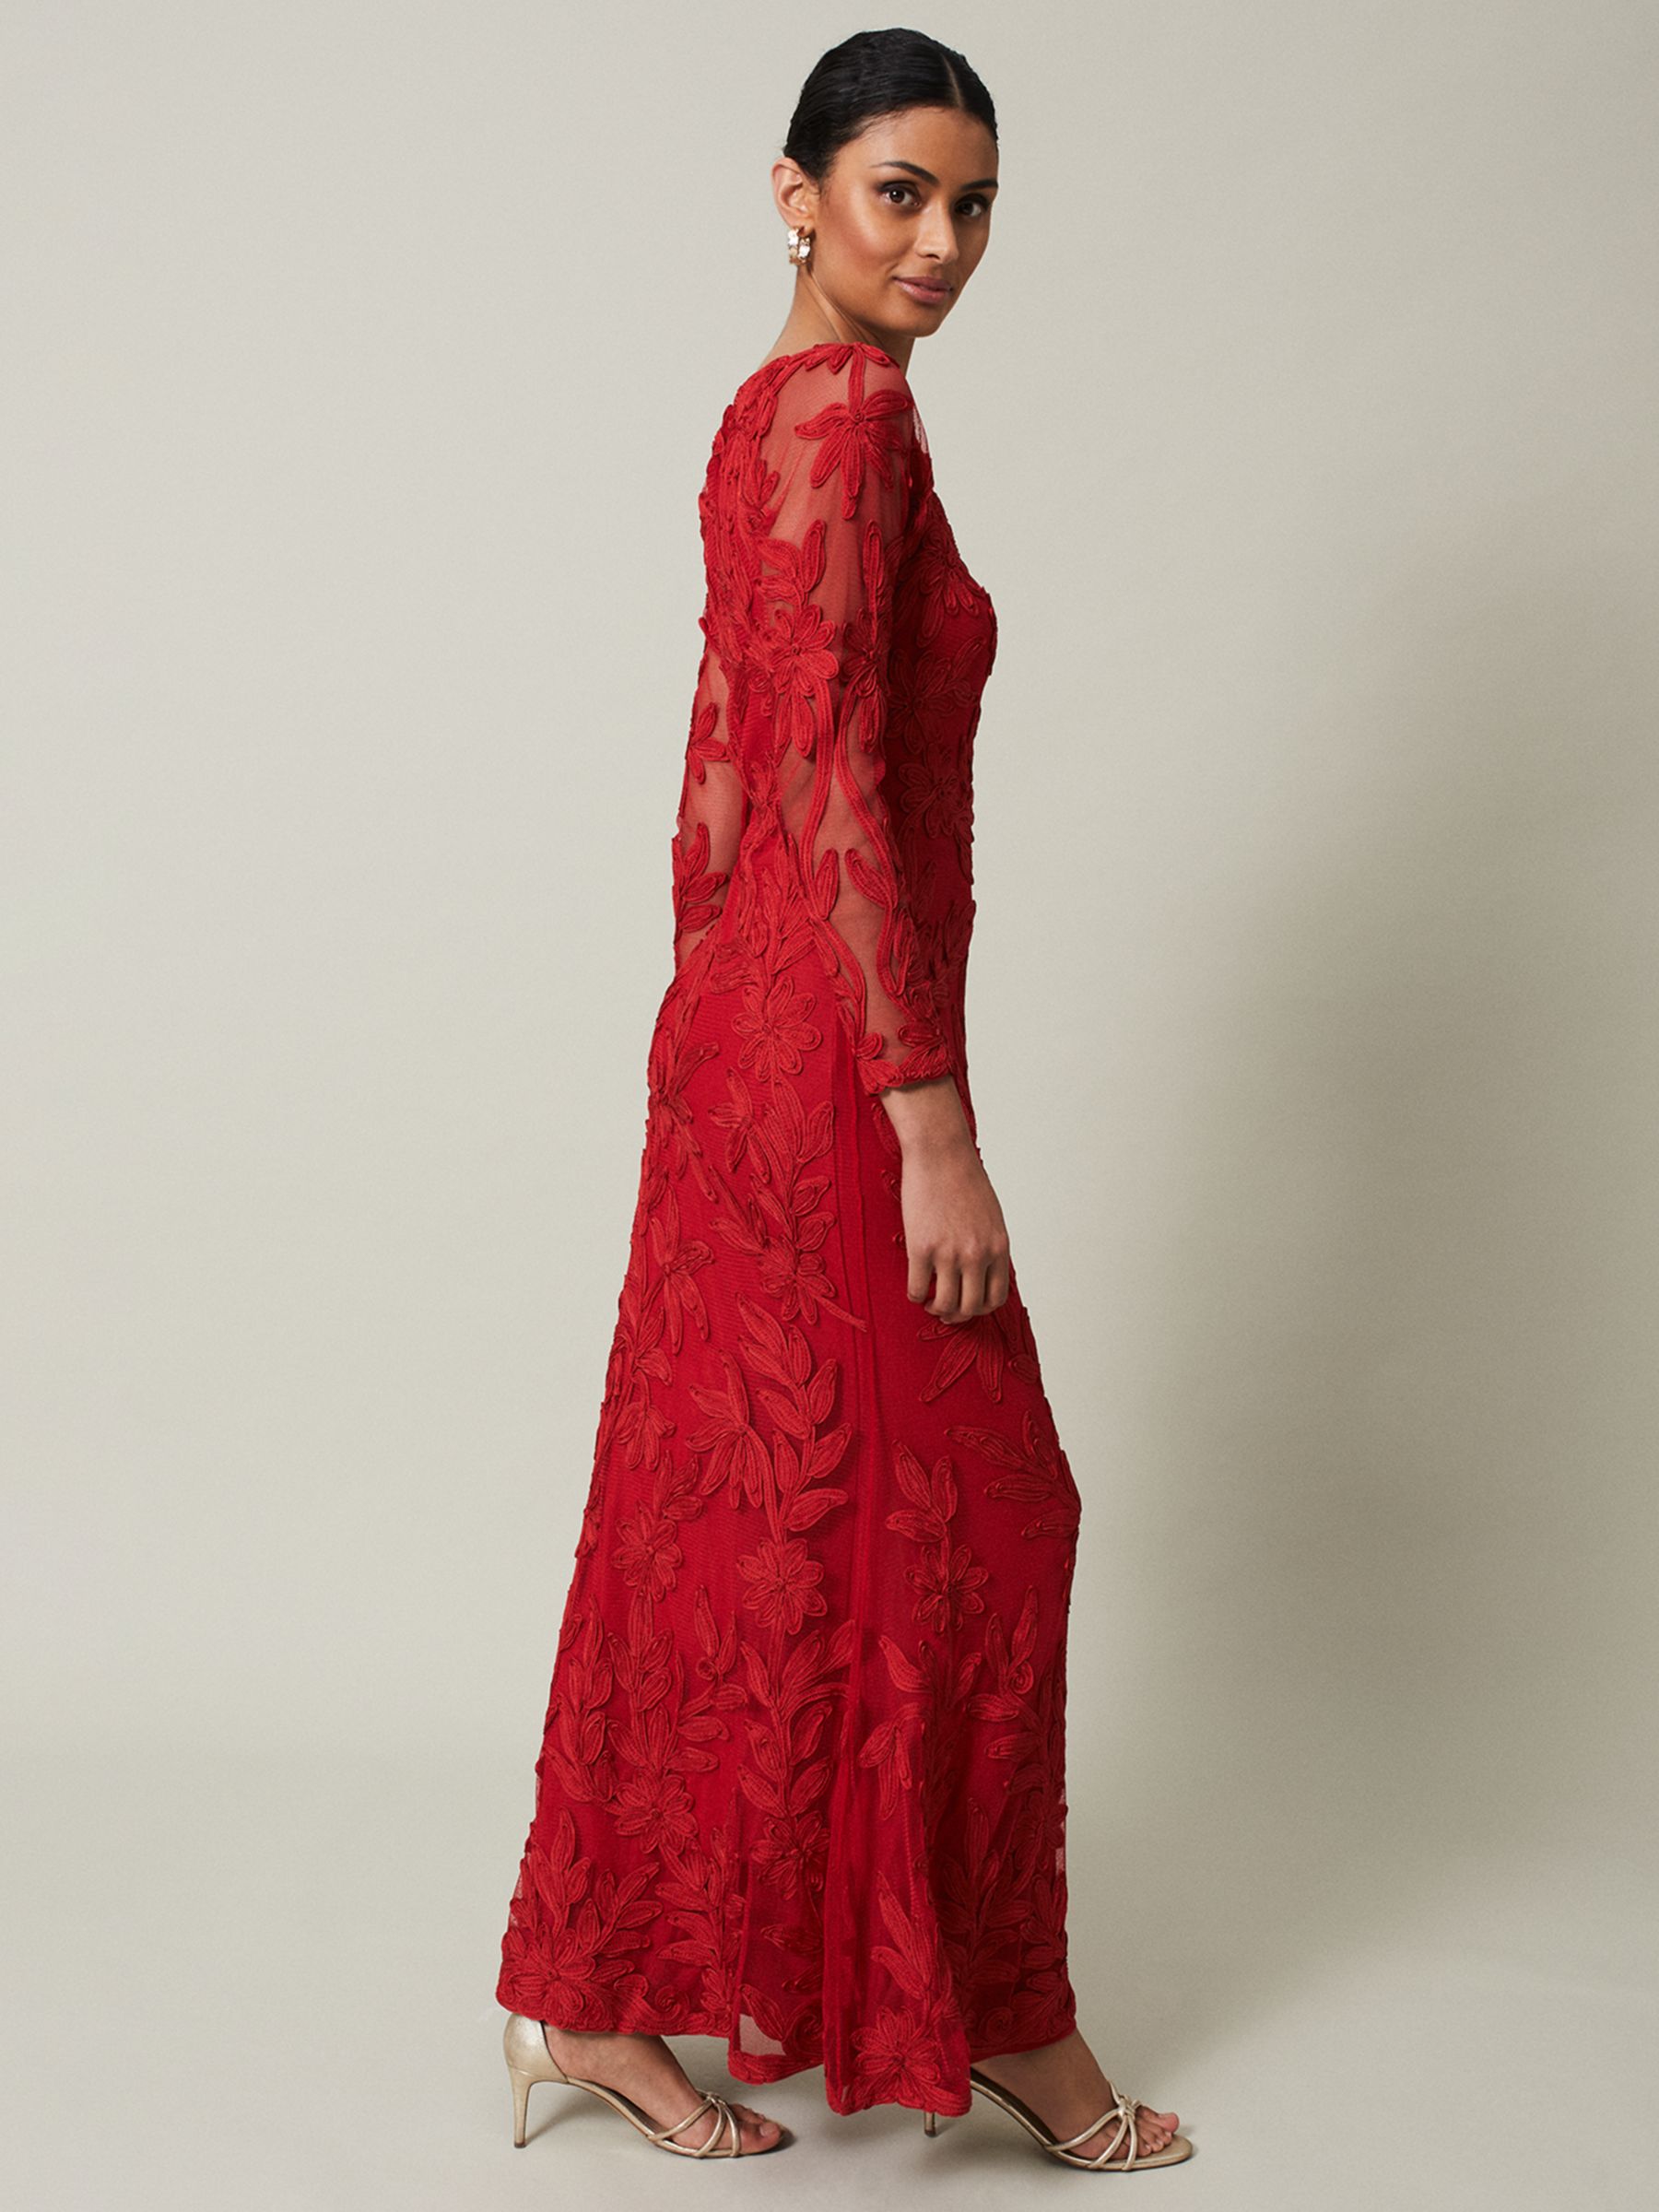 Buy Phase Eight Alicia Tapework Lace Dress, Scarlet Online at johnlewis.com